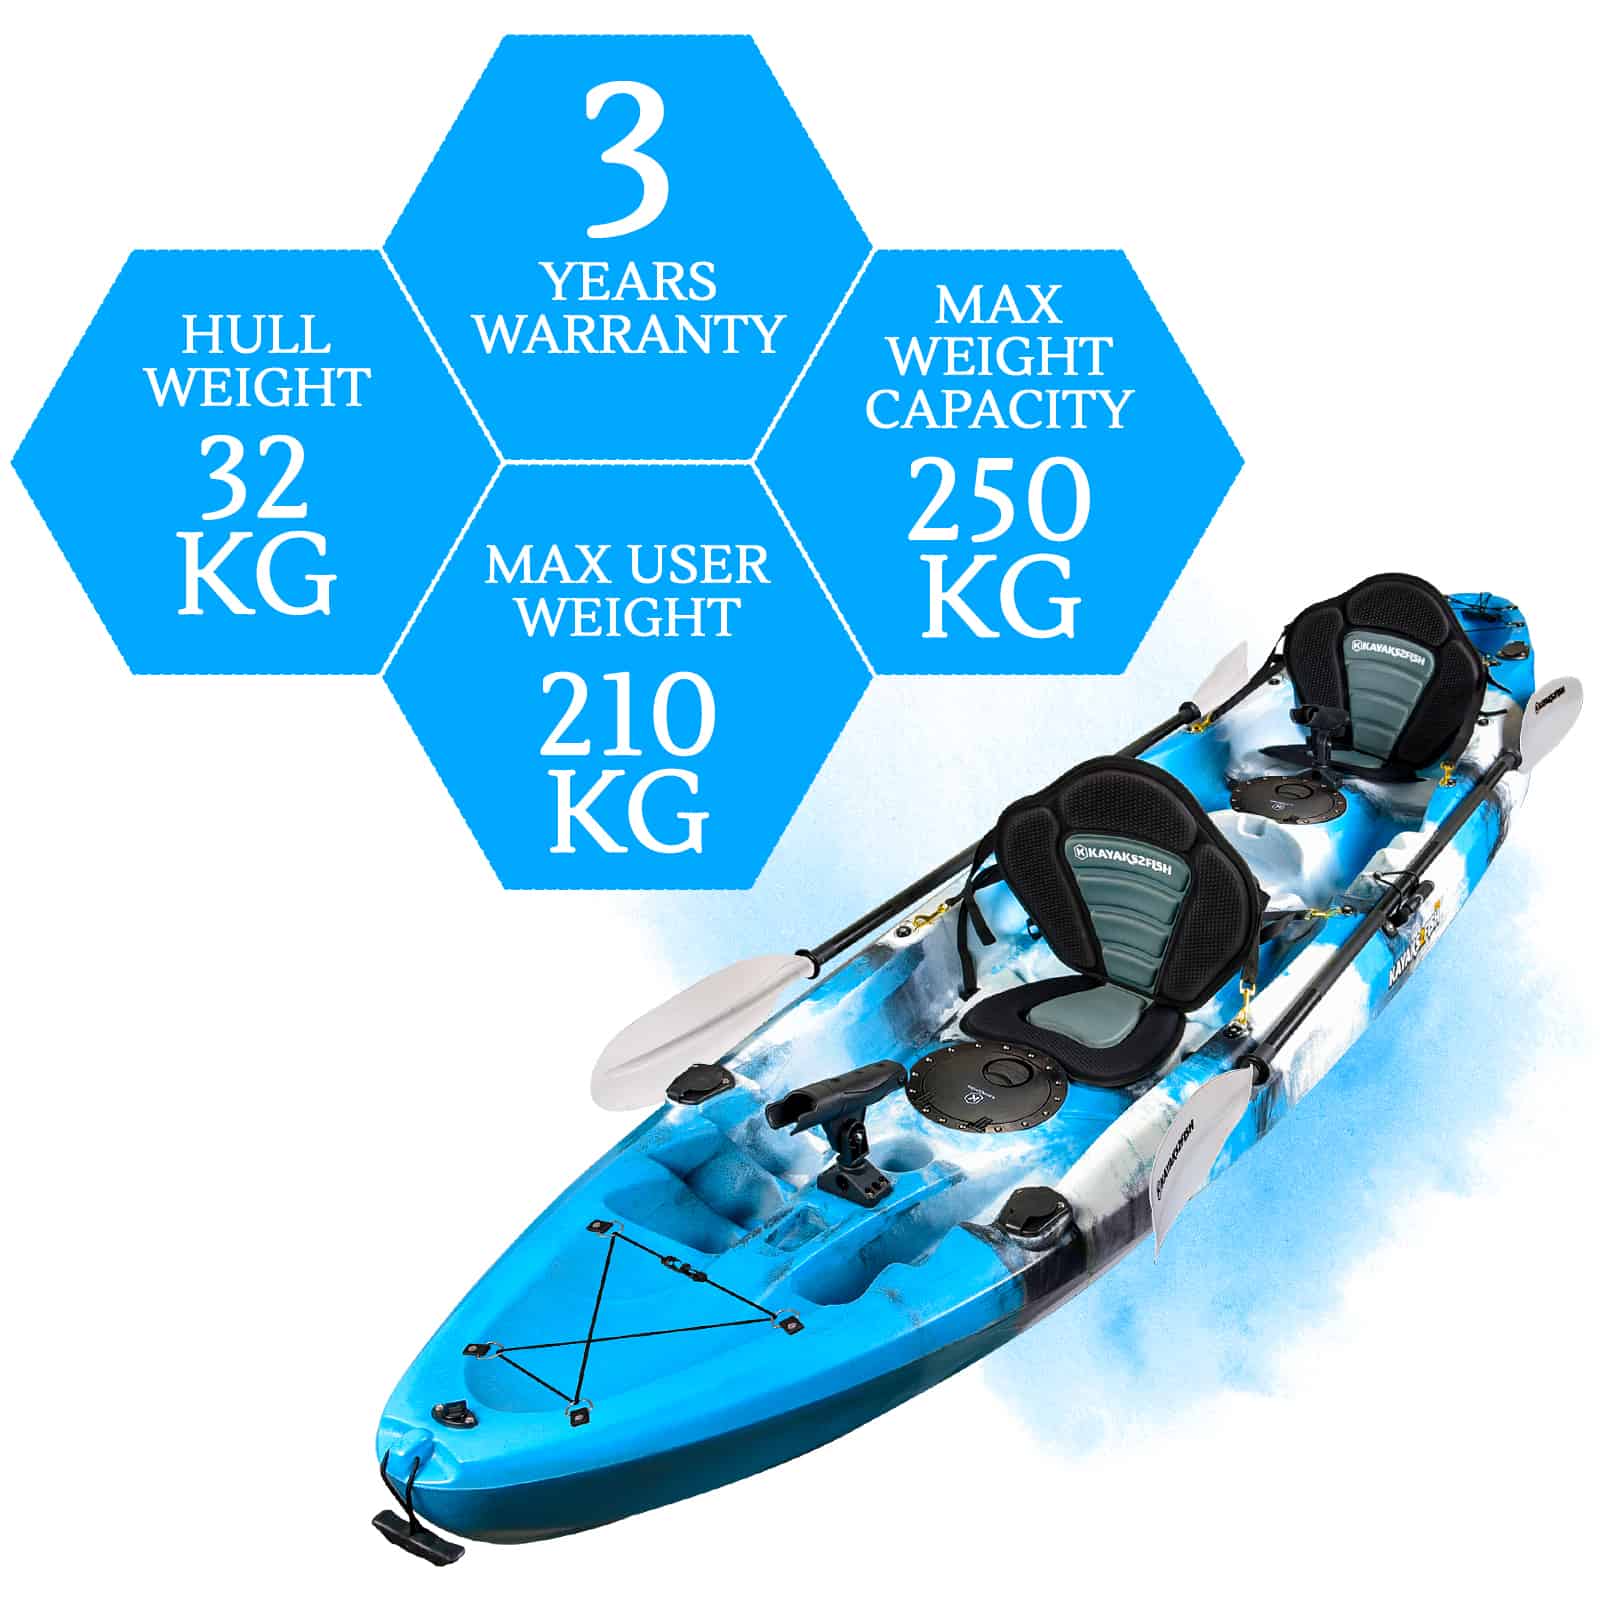 K2F-EAGLE-BLUELAGOON specifications